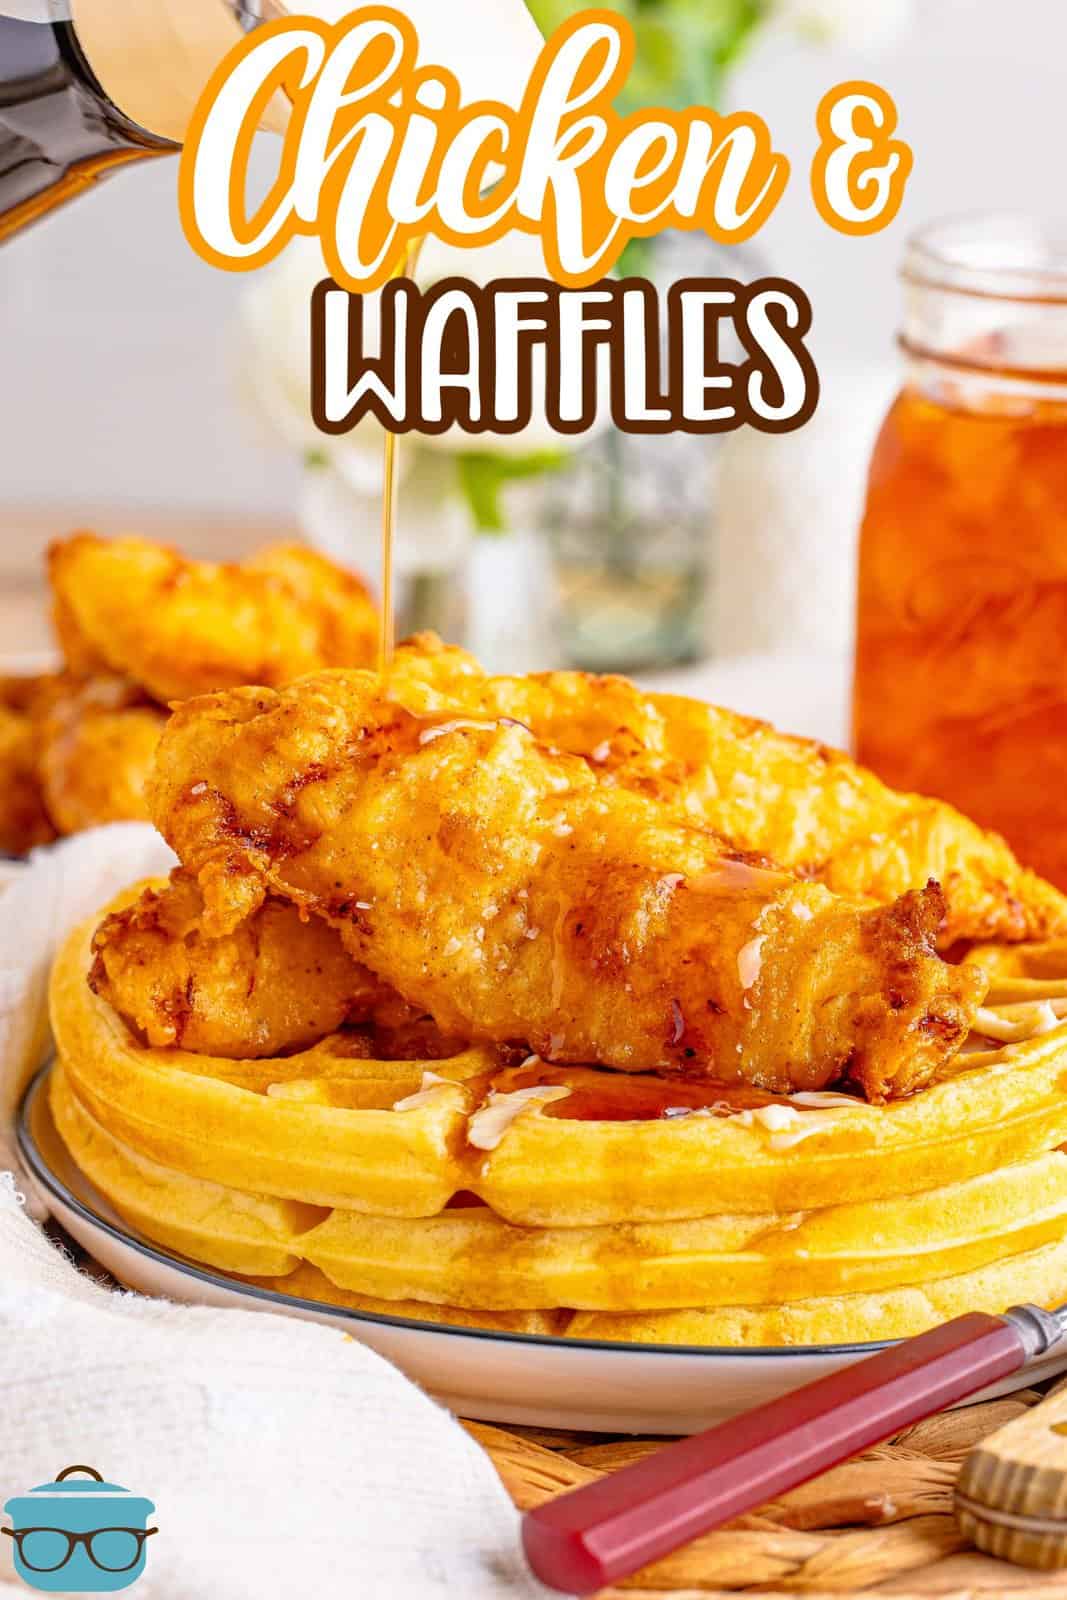 A plate with thick Buttermilk Waffles and Chicken.